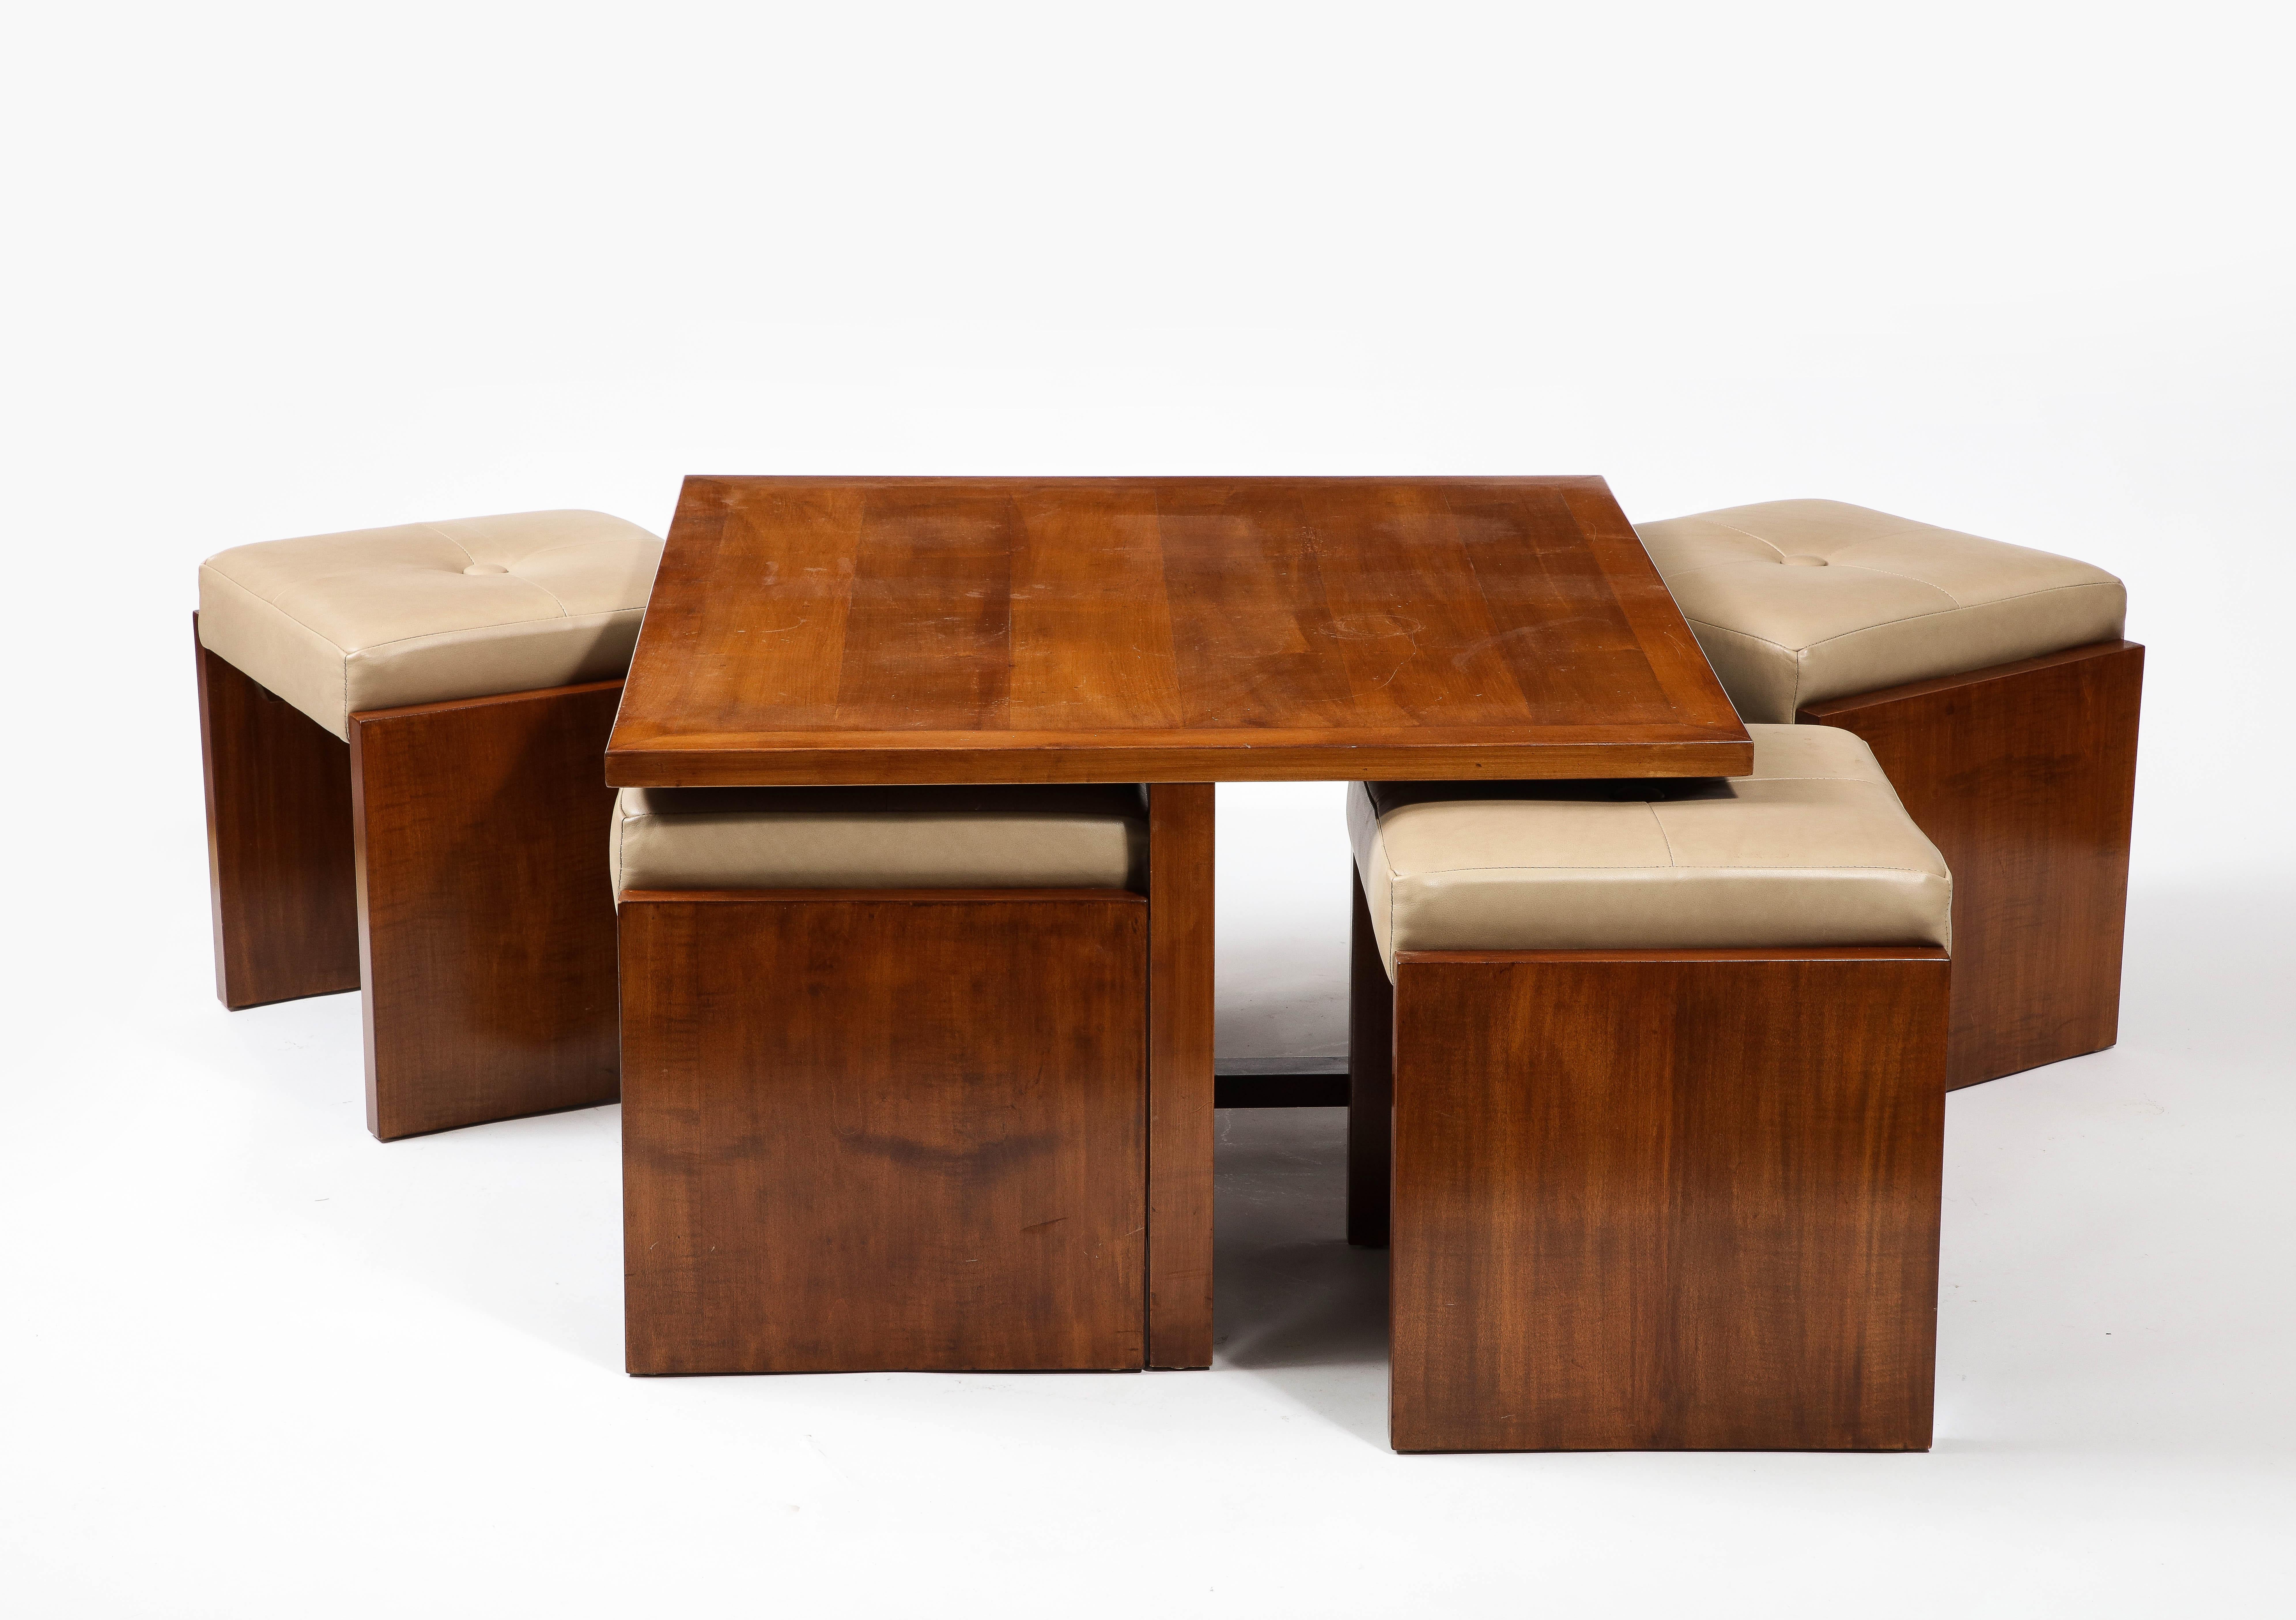 Square Walnut Coffee Table with Four Nesting Upholstered Stools, France 1940's For Sale 2